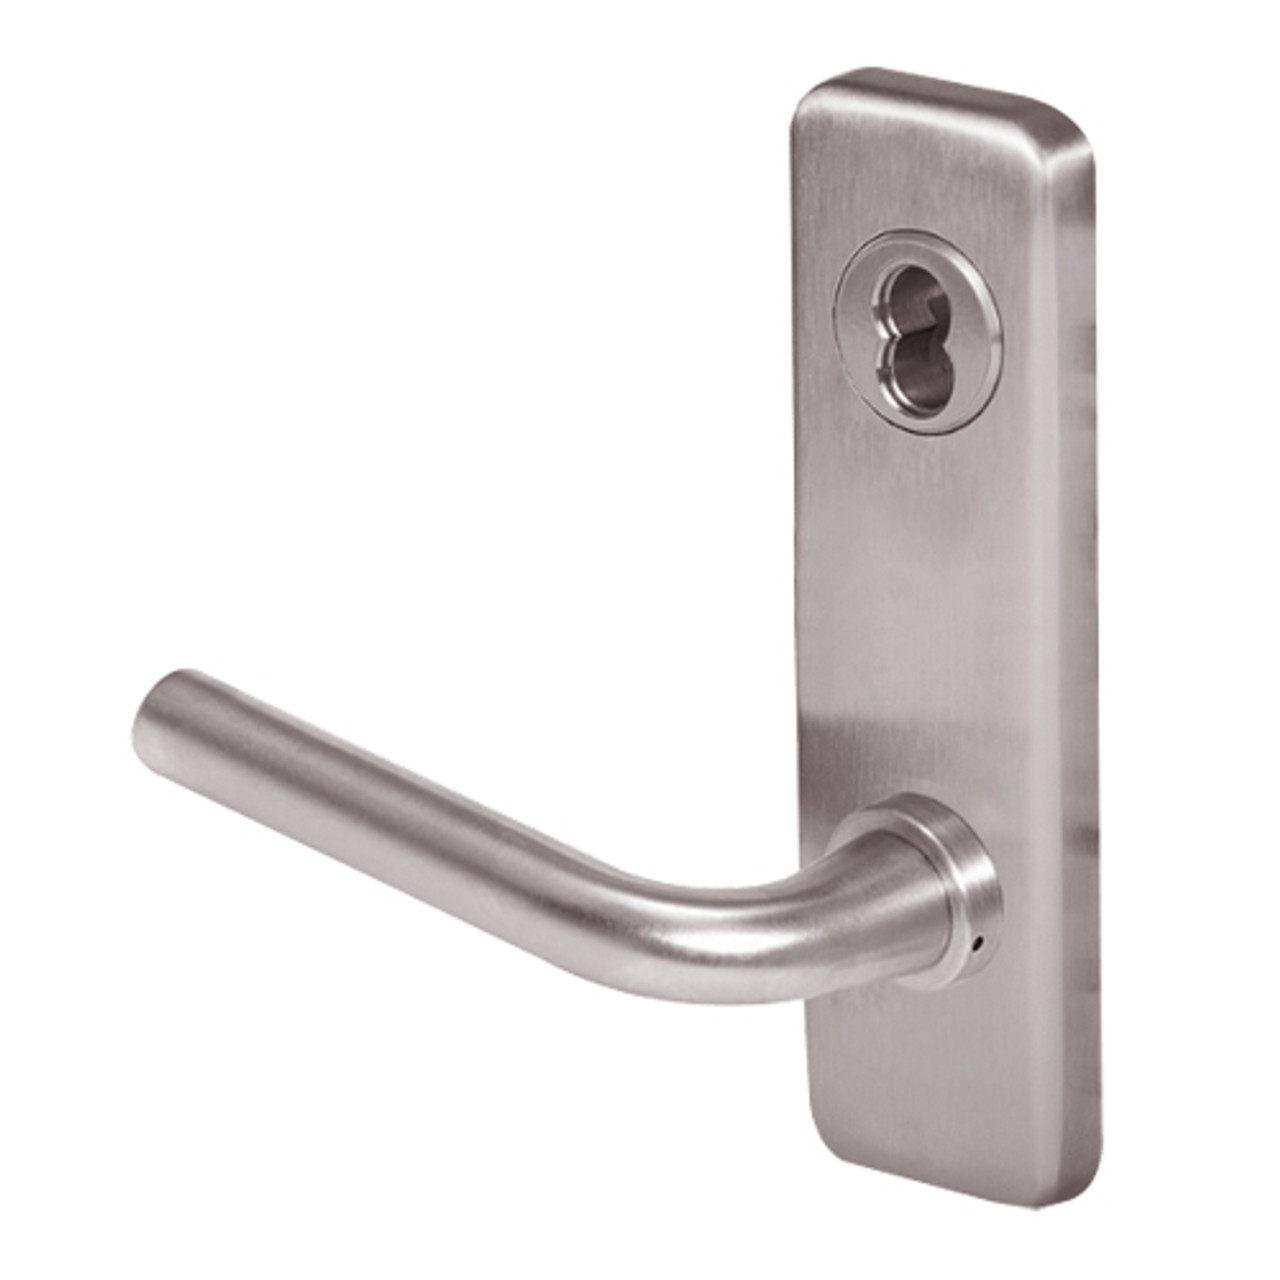 45HW7TWEL12J63012V Best 40HW series Double Key Deadbolt Fail Safe Electromechanical Mortise Lever Lock with Solid Tube w/ No Return Style in Satin Stainless Steel